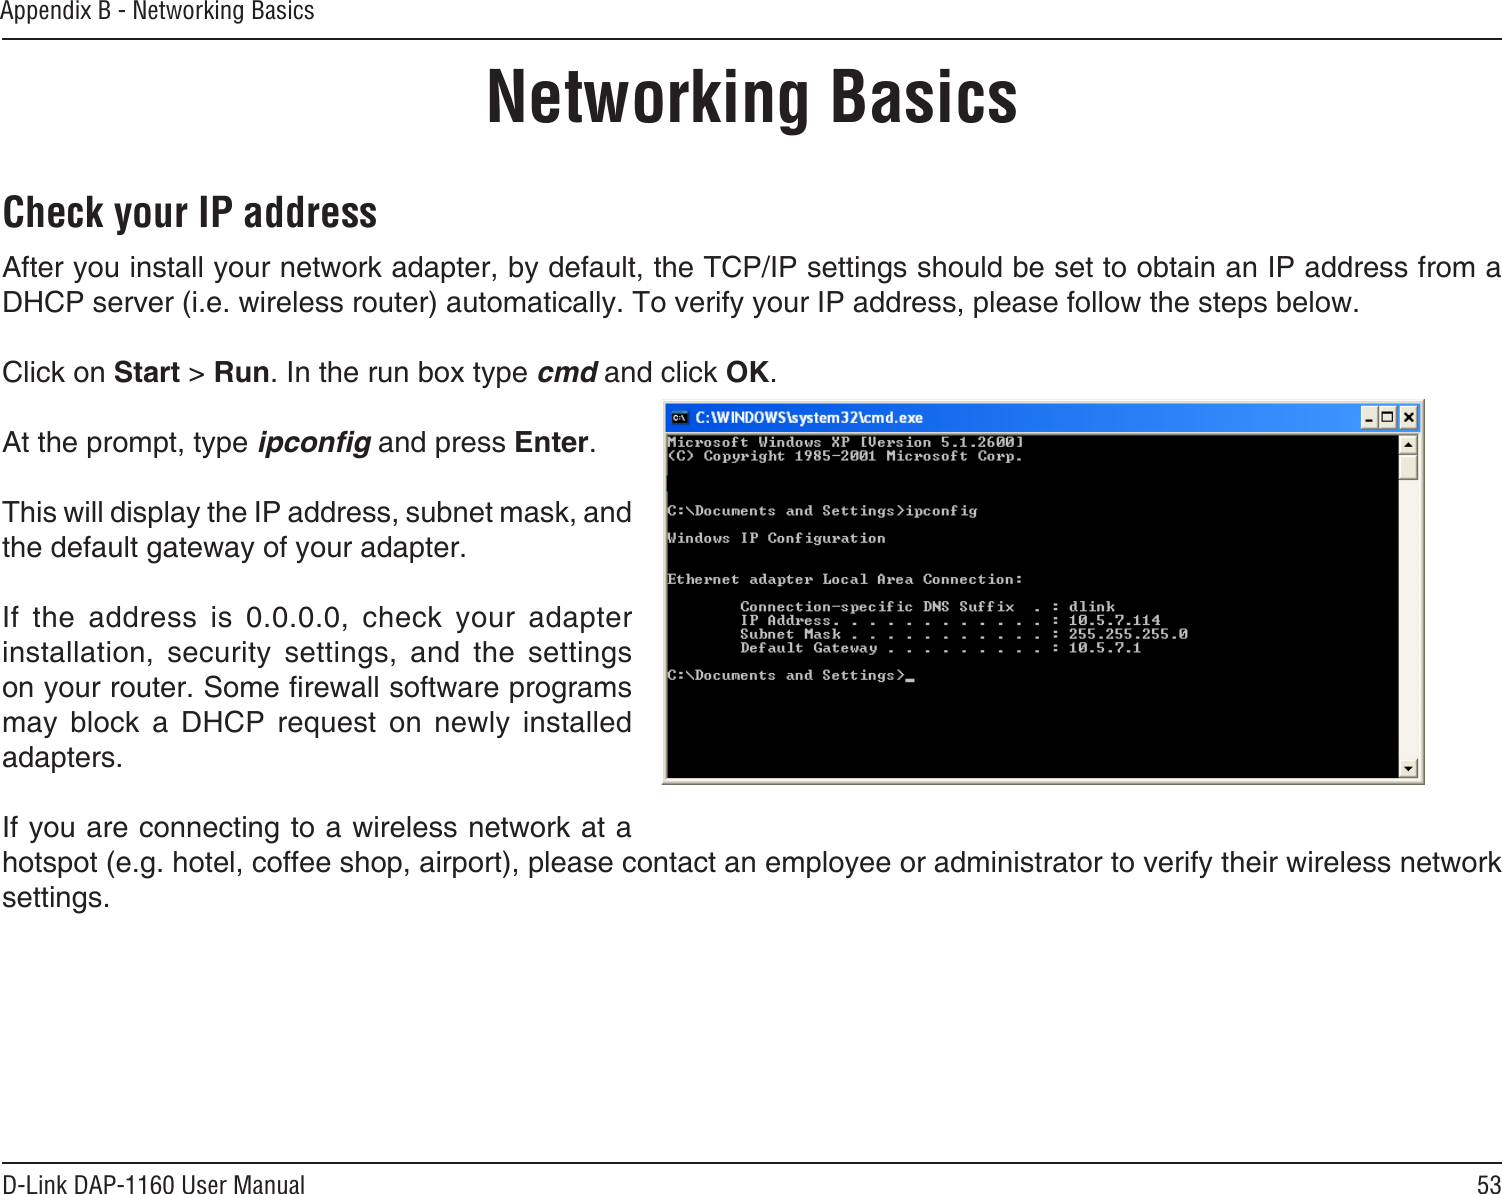 53D-Link DAP-1160 User ManualAppendix B - Networking BasicsNetworking BasicsCheck your IP addressAfter you install your network adapter, by default, the TCP/IP settings should be set to obtain an IP address from a DHCP server (i.e. wireless router) automatically. To verify your IP address, please follow the steps below.Click on Start &gt; Run. In the run box type cmd and click OK.At the prompt, type ipconﬁg and press Enter.This will display the IP address, subnet mask, and the default gateway of your adapter.If  the  address  is  0.0.0.0,  check  your  adapter installation,  security  settings,  and  the  settings on your router. Some rewall software programs may  block  a  DHCP  request  on  newly  installed adapters. If you are connecting to a wireless network at a hotspot (e.g. hotel, coffee shop, airport), please contact an employee or administrator to verify their wireless network settings.